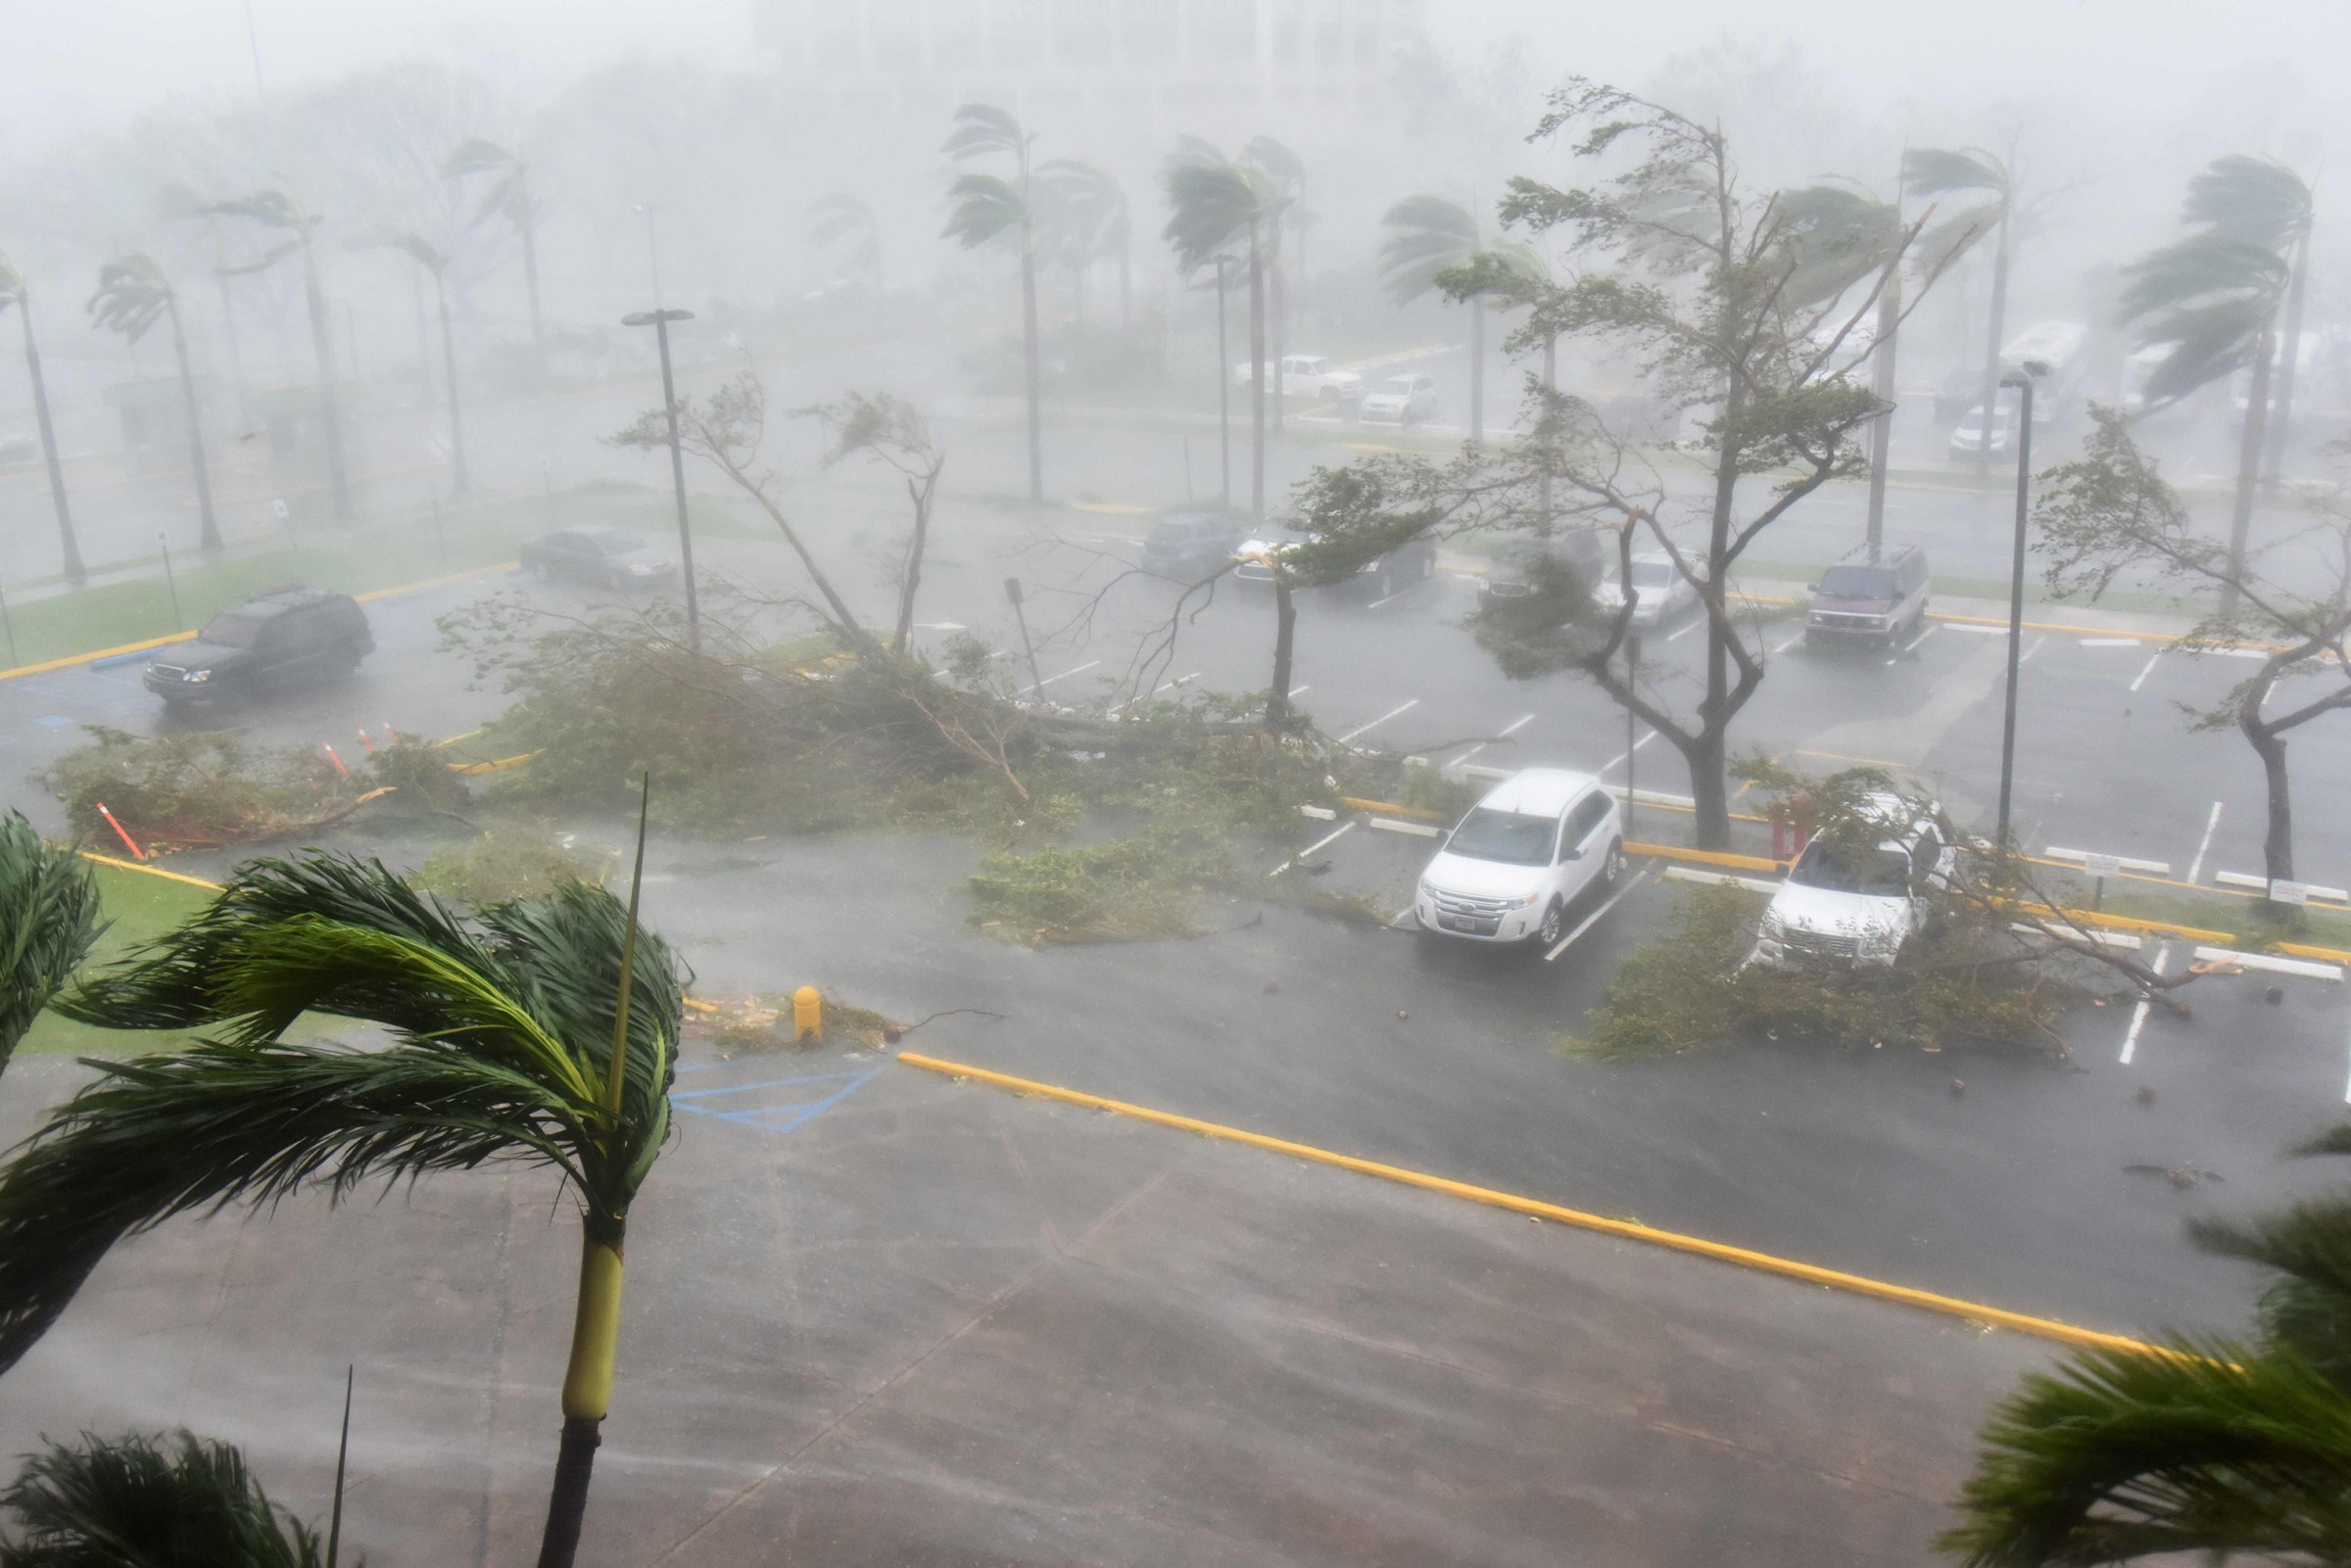 Trees are toppled in a parking lot at Roberto Clemente Coliseum in San Juan, Puerto Rico, on Sept. 20, 2017.